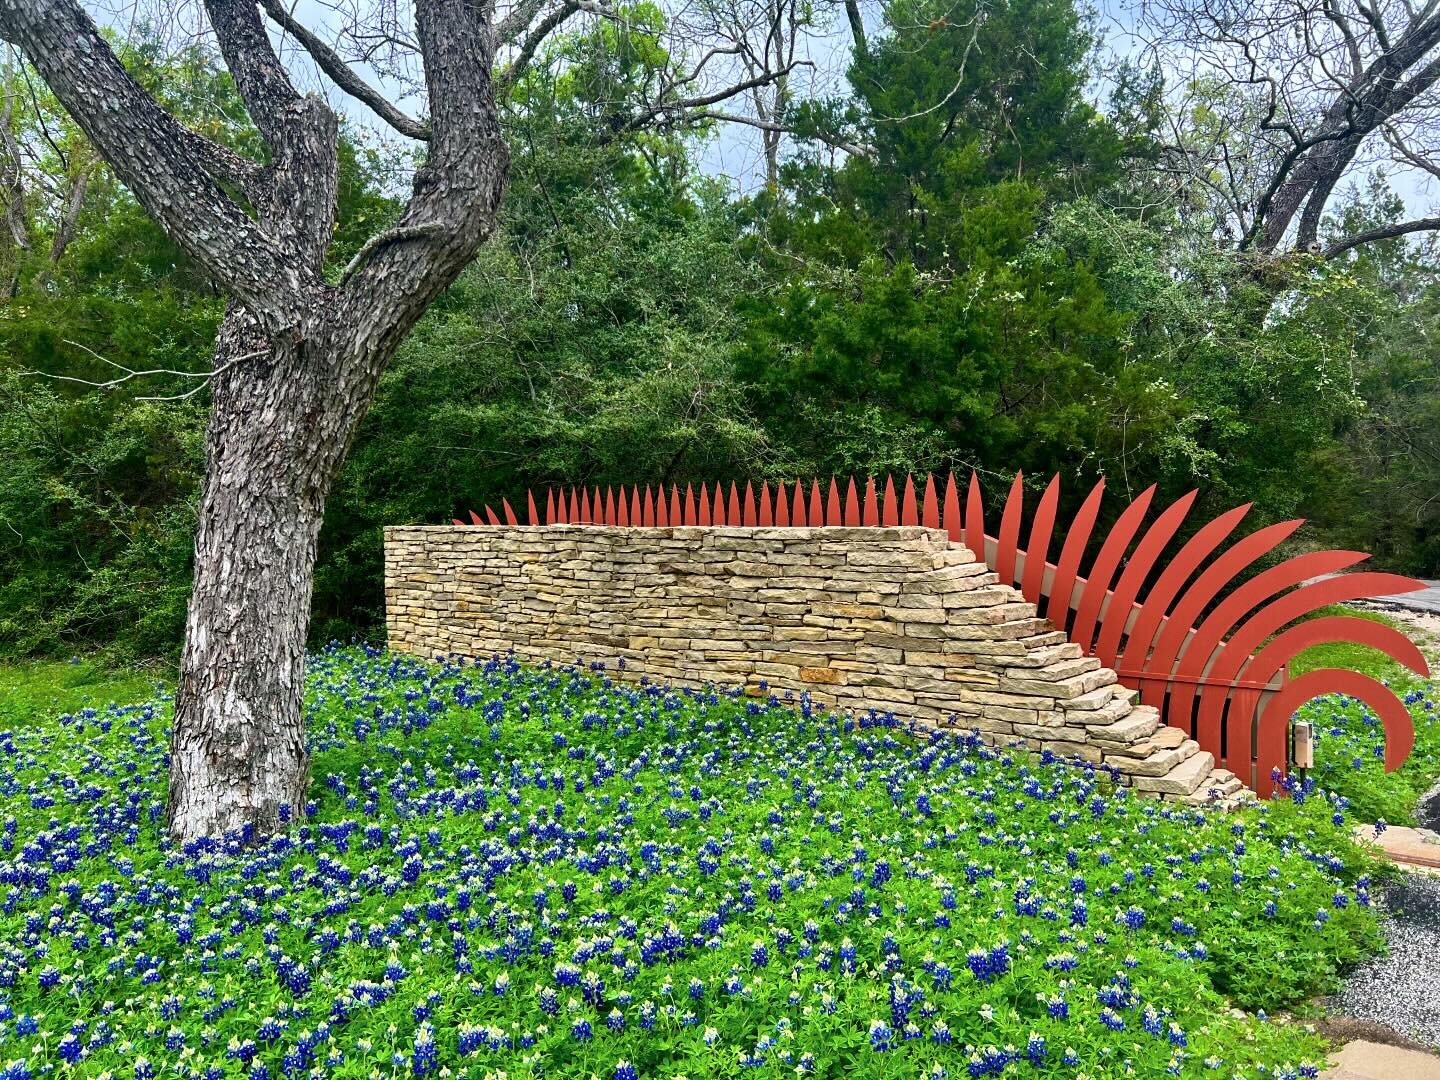 Spring is near, the bluebonnets are popping, and we&rsquo;re gearing up for our annual Easter Eggstravaganza! Don&rsquo;t forget to RSVP, and we&rsquo;re looking forward to seeing everyone soon 🐣🪺🌷🌼

#spring #easter #landscapedesign #landscapearc